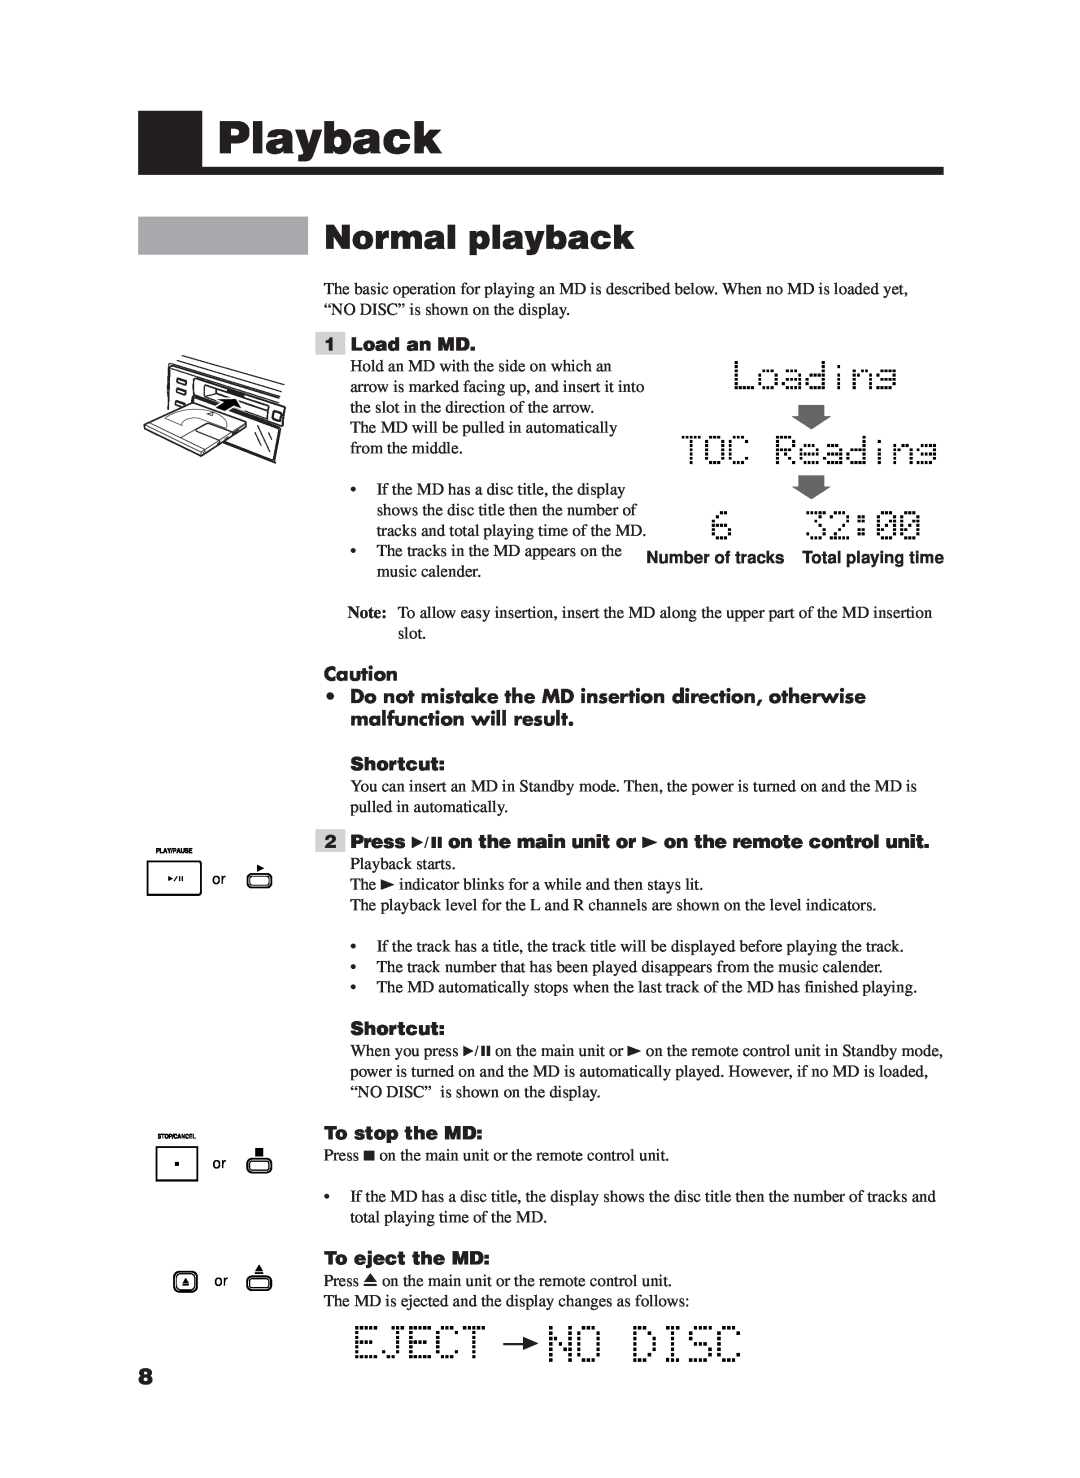 JVC XM-228BK manual Playback, Normal playback, Load an MD, Shortcut, To stop the MD, To eject the MD 